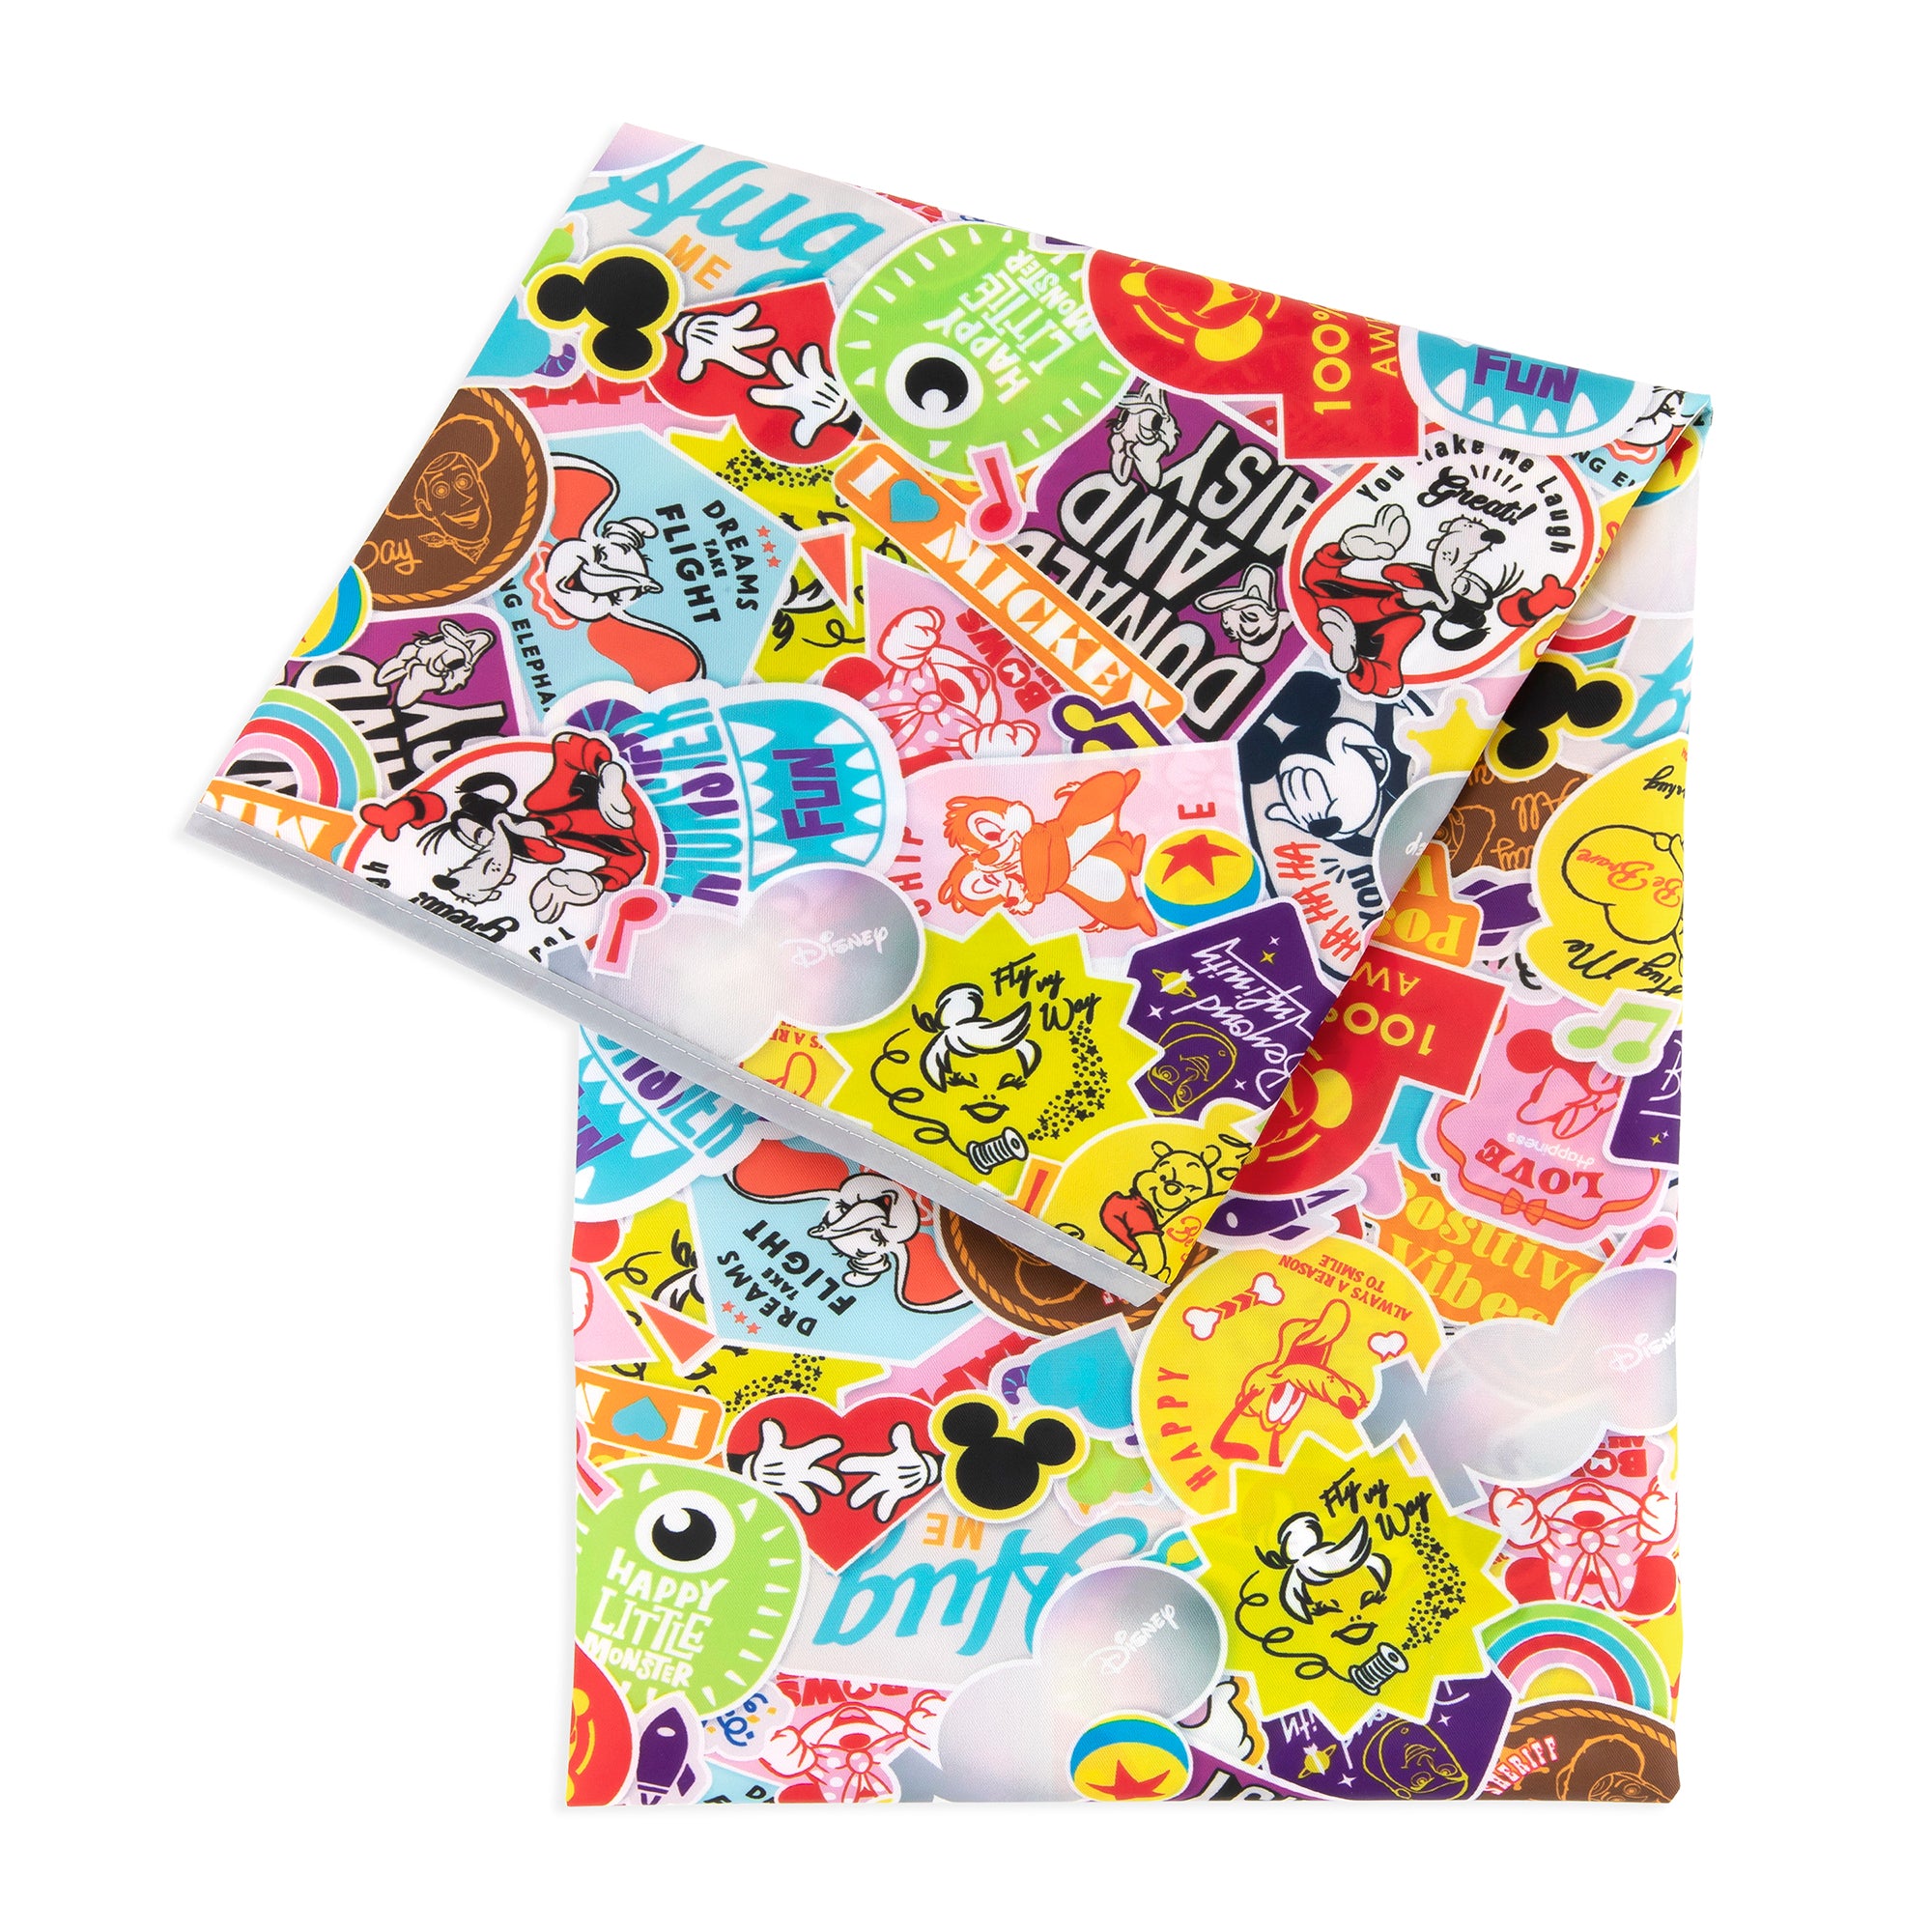 READY 2 LEARN Messy Mat - Splat Mat for Kids - Protect Tables and Floors -  Waterproof - Reusable and Lightweight - 60 L x 60 W